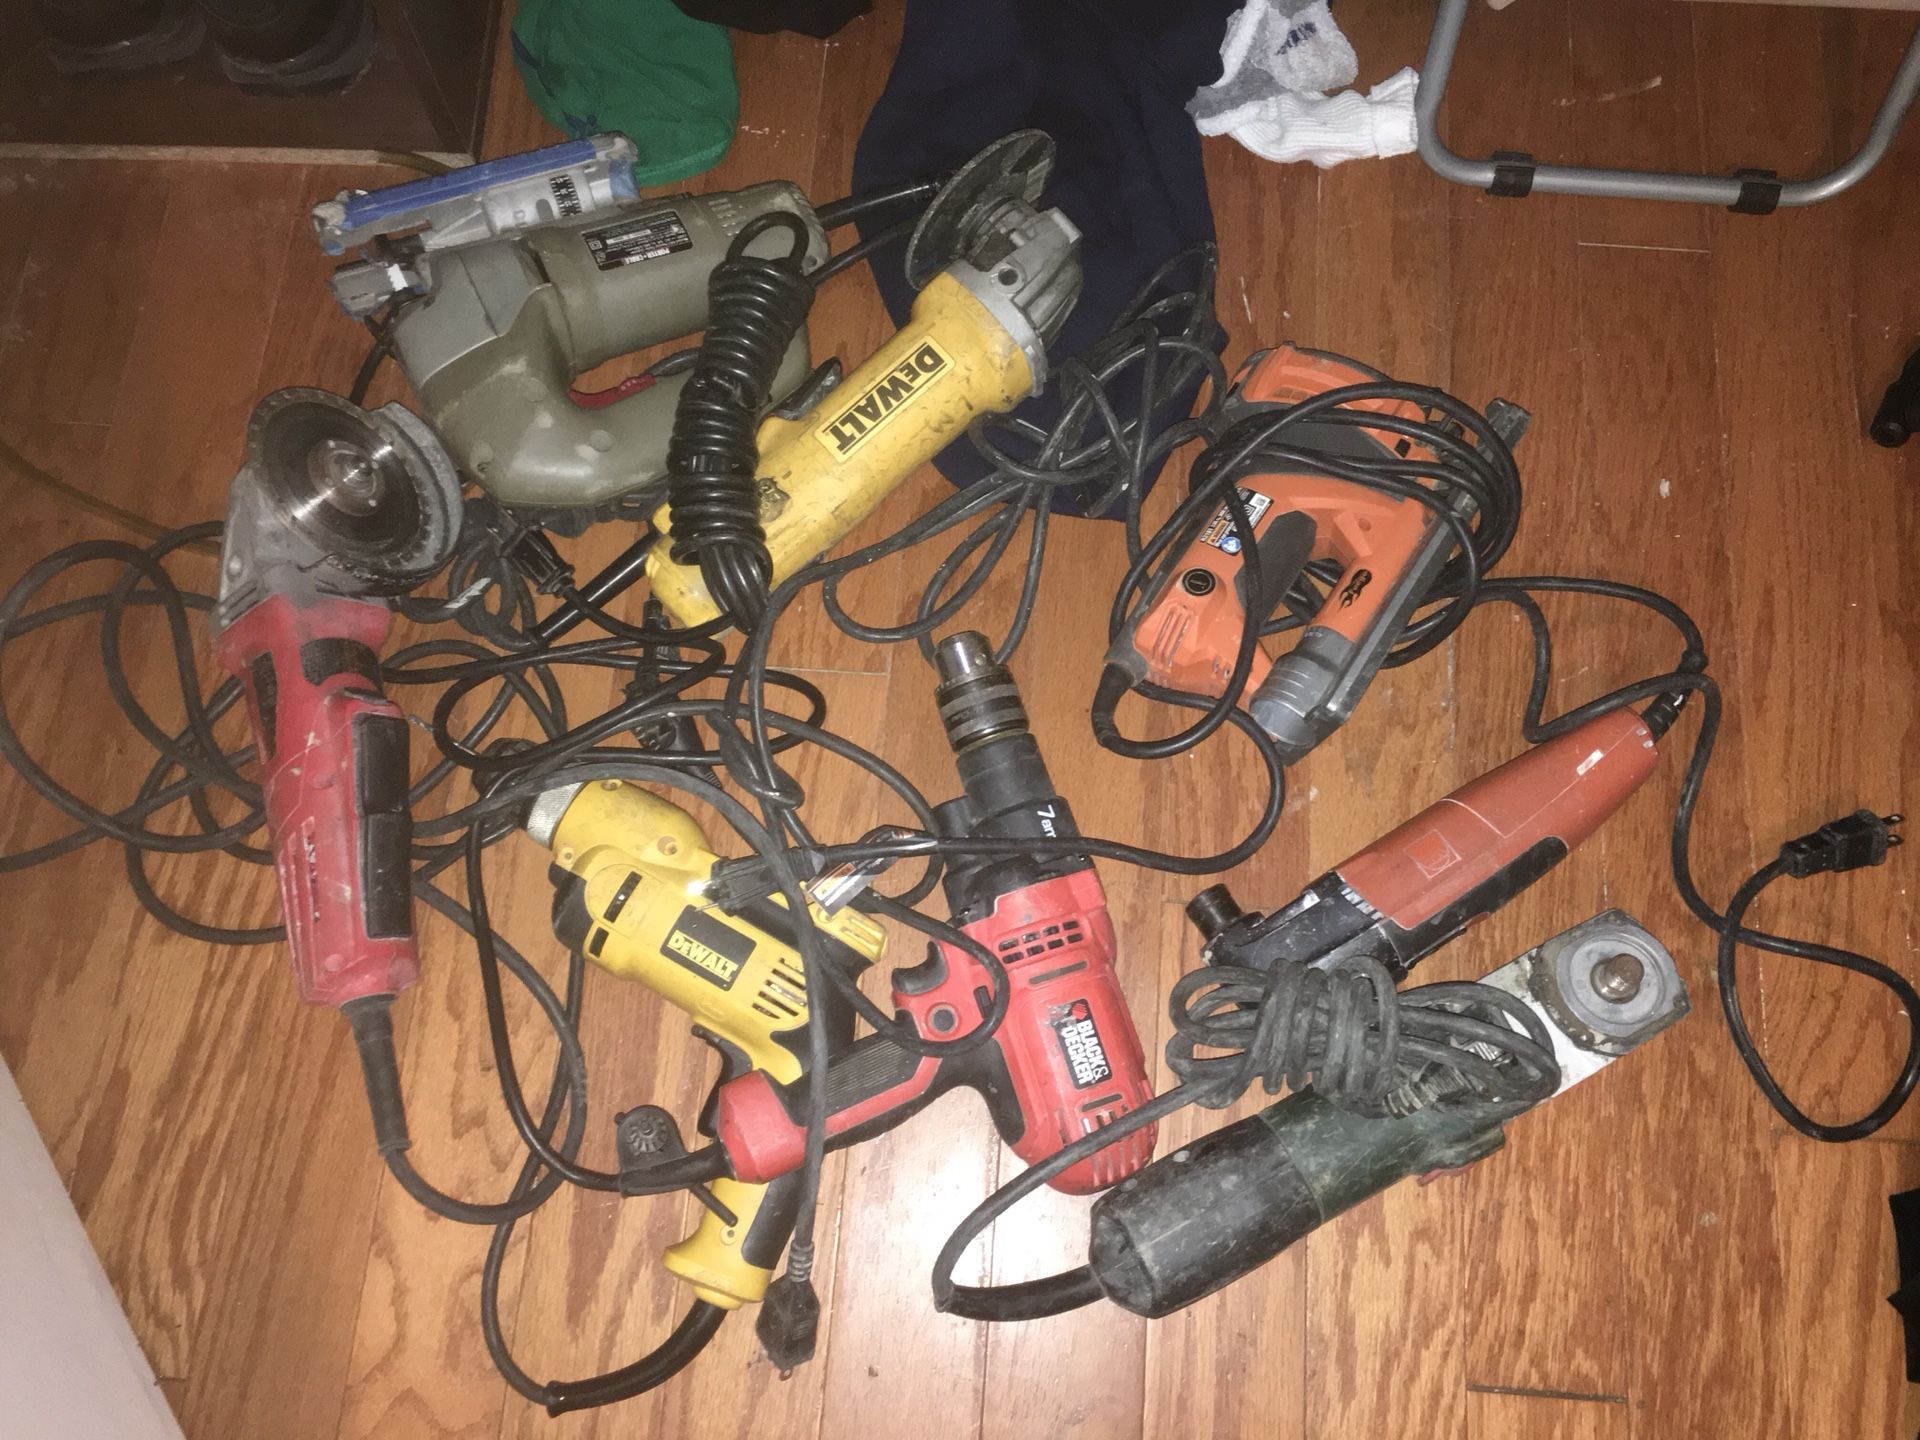 Saws and drills